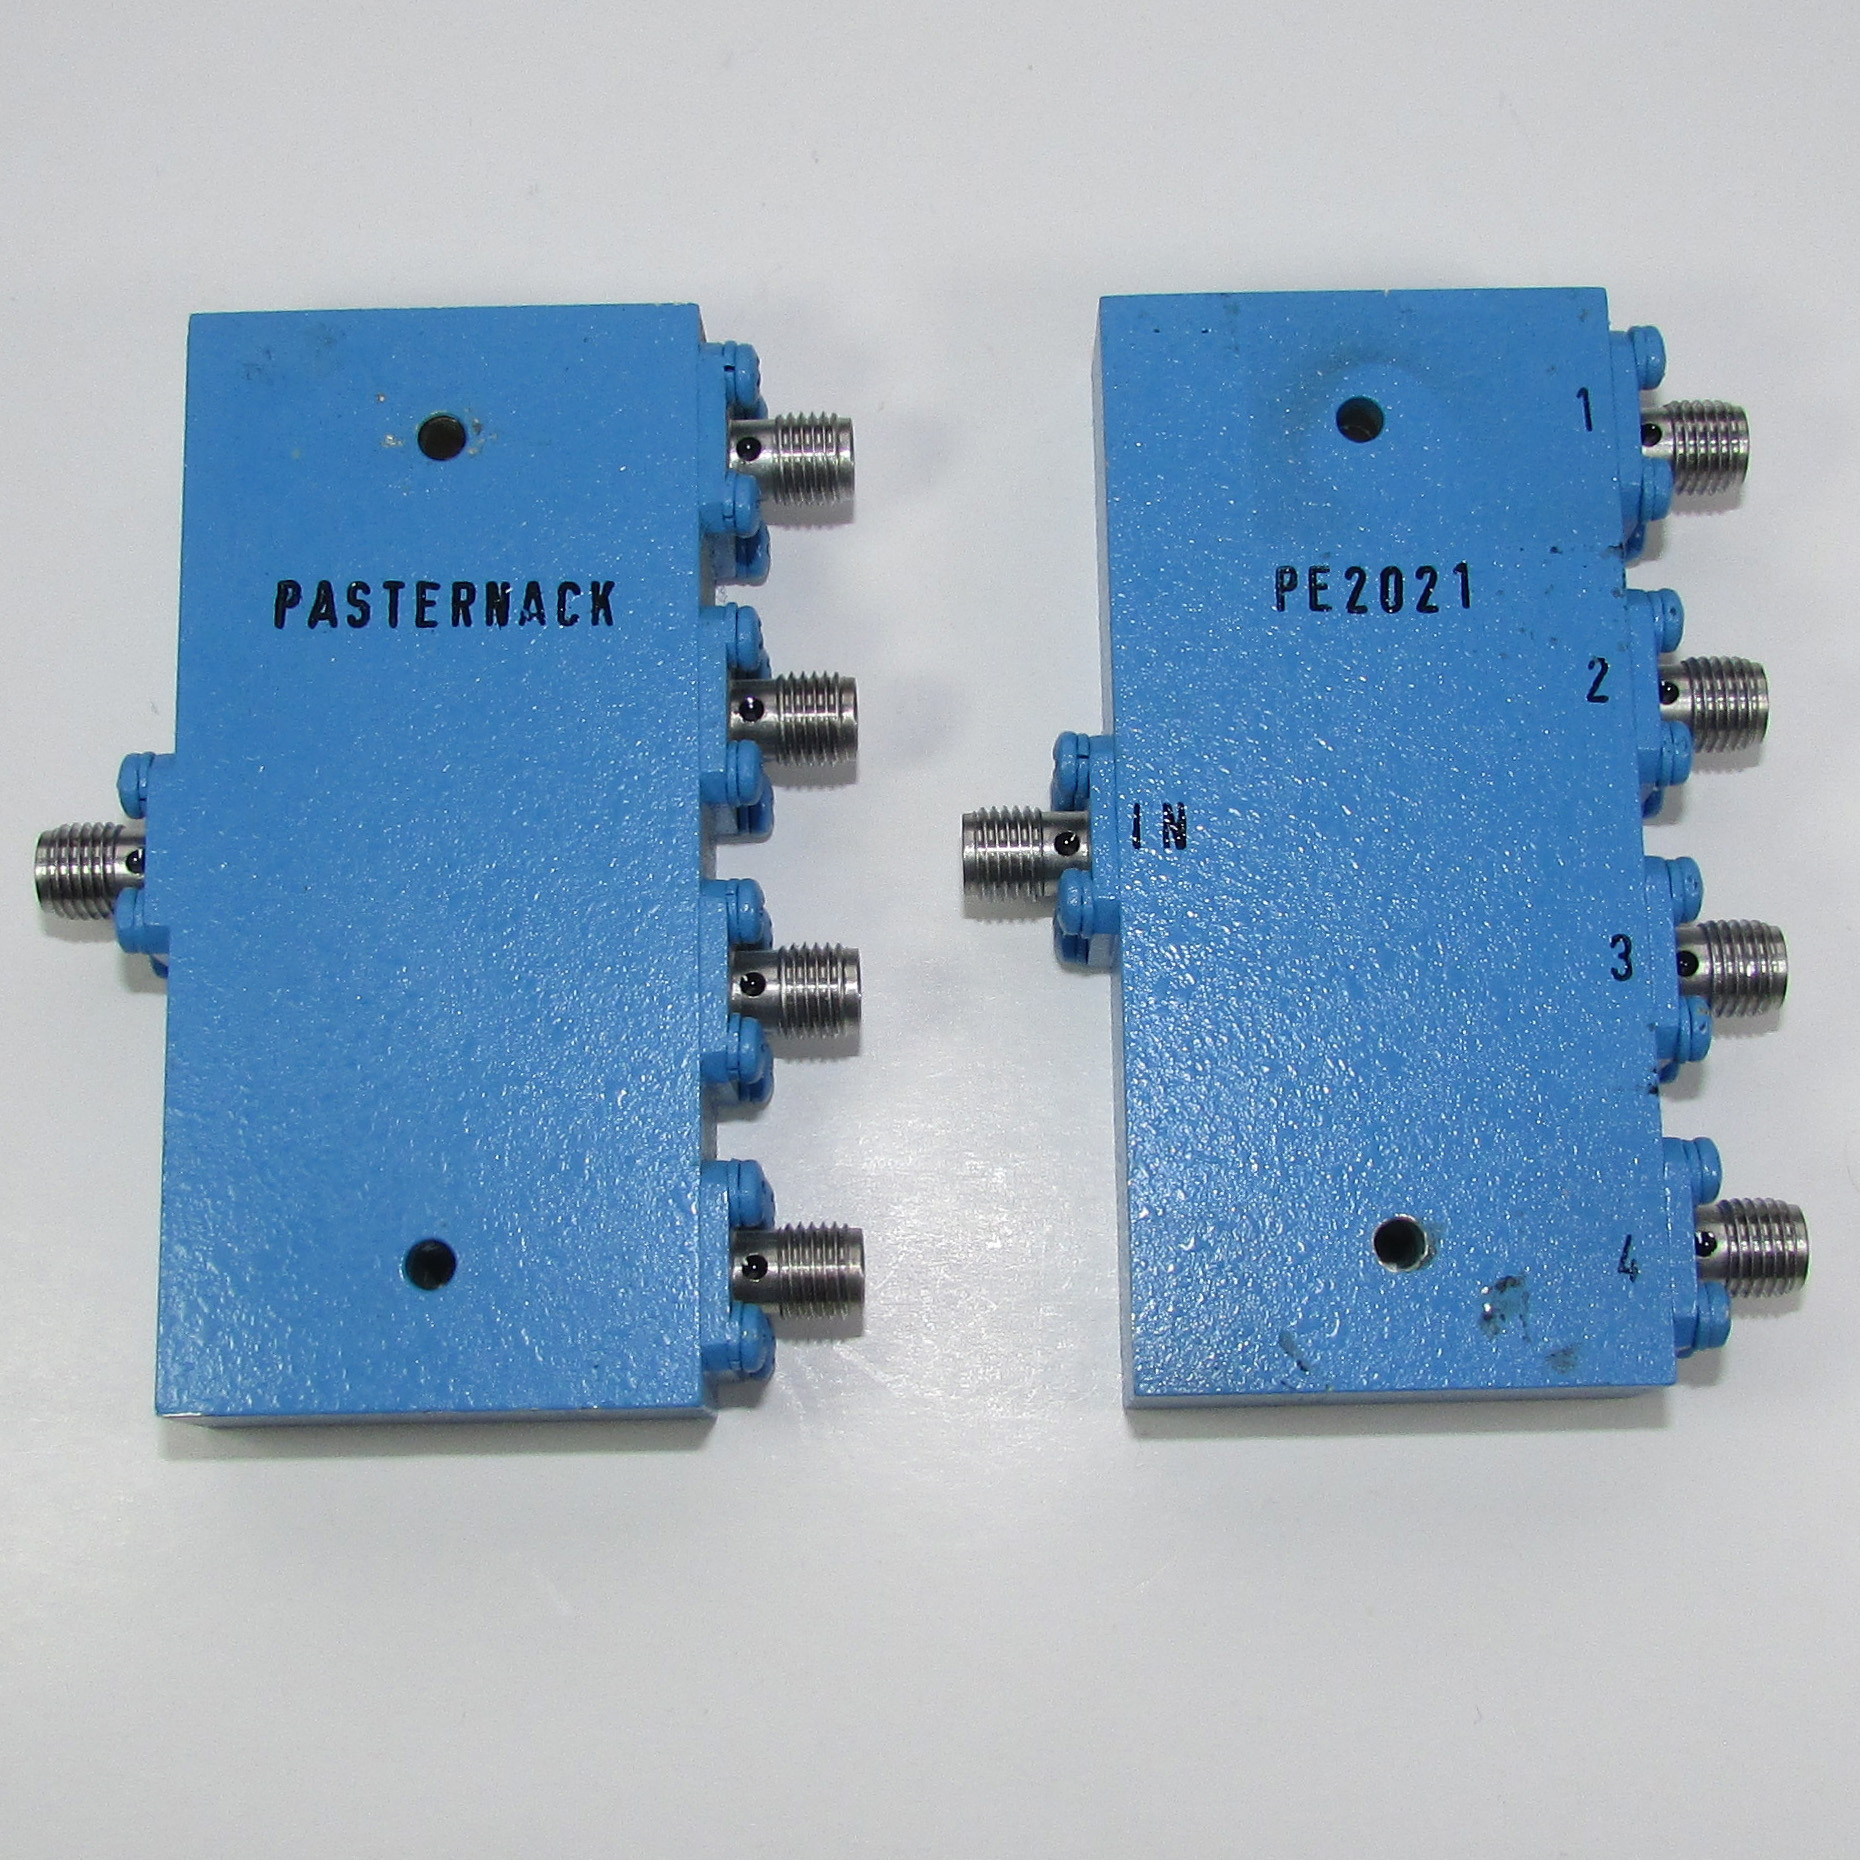 Pasternack PE2021 7-12.4GHz 10W SMA RF Microwave Coaxial One Point Four Power Divider